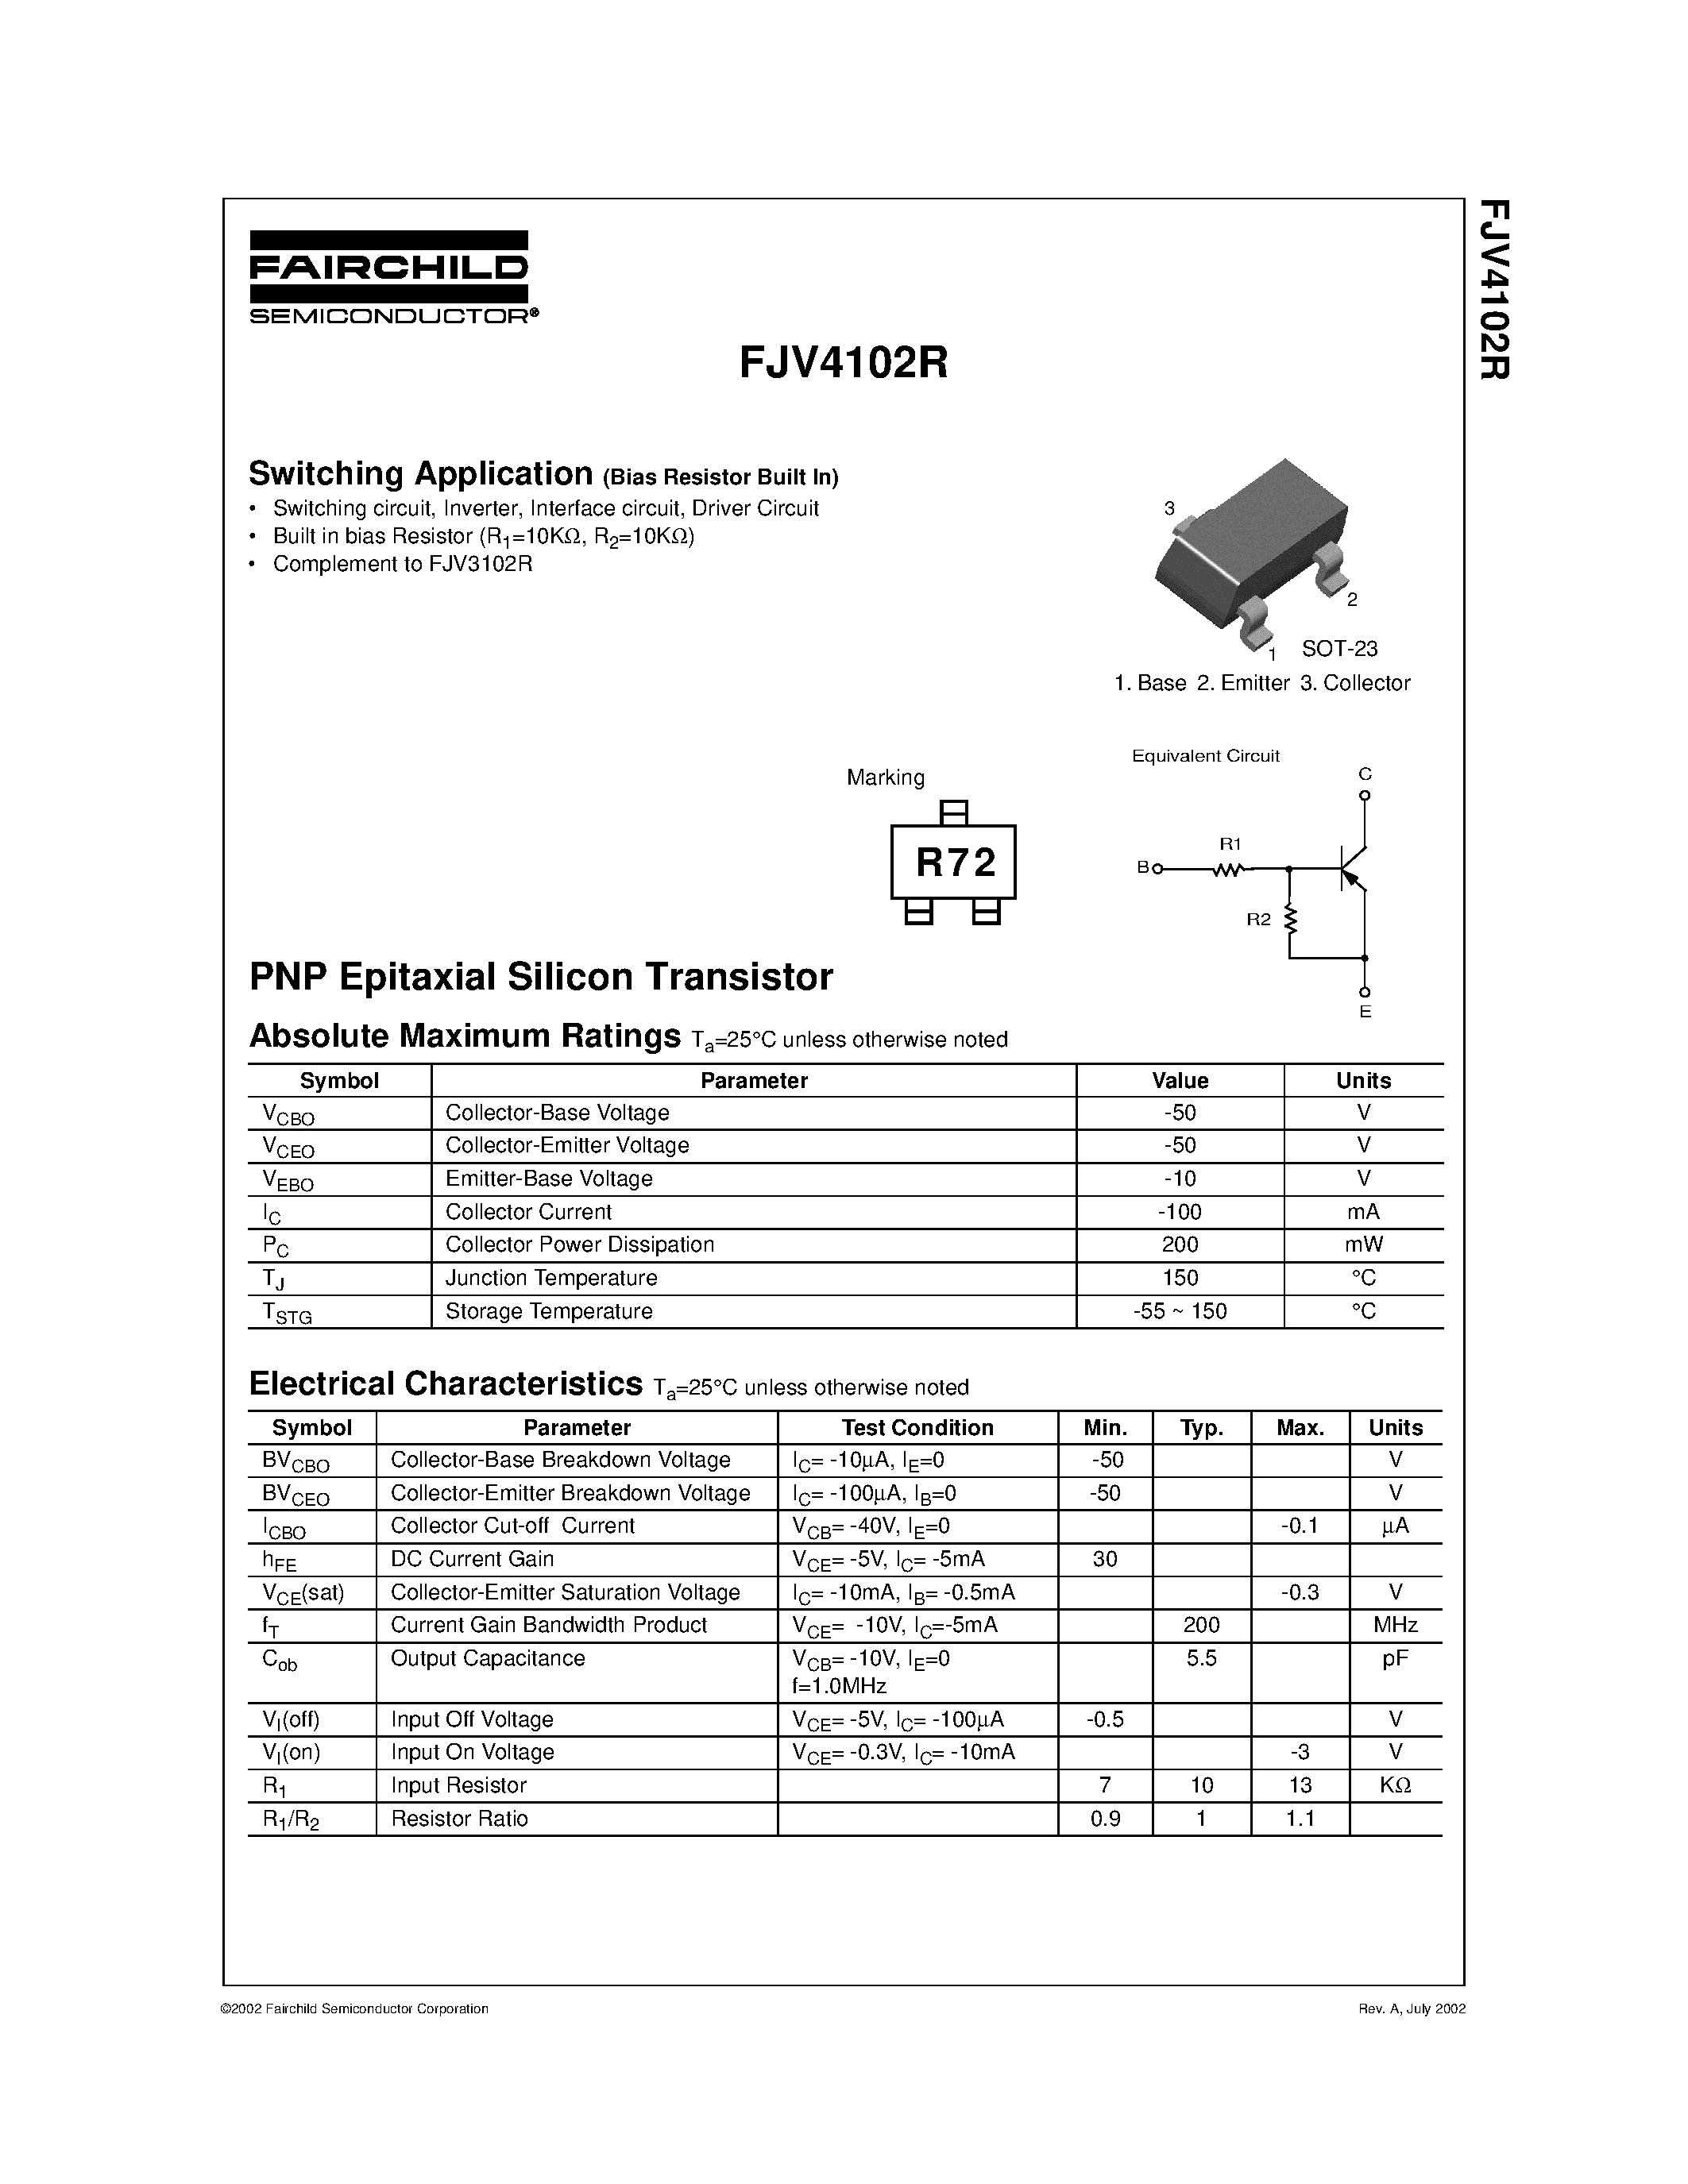 Даташит FJV4102R - PNP Epitaxial Silicon Transistor страница 1